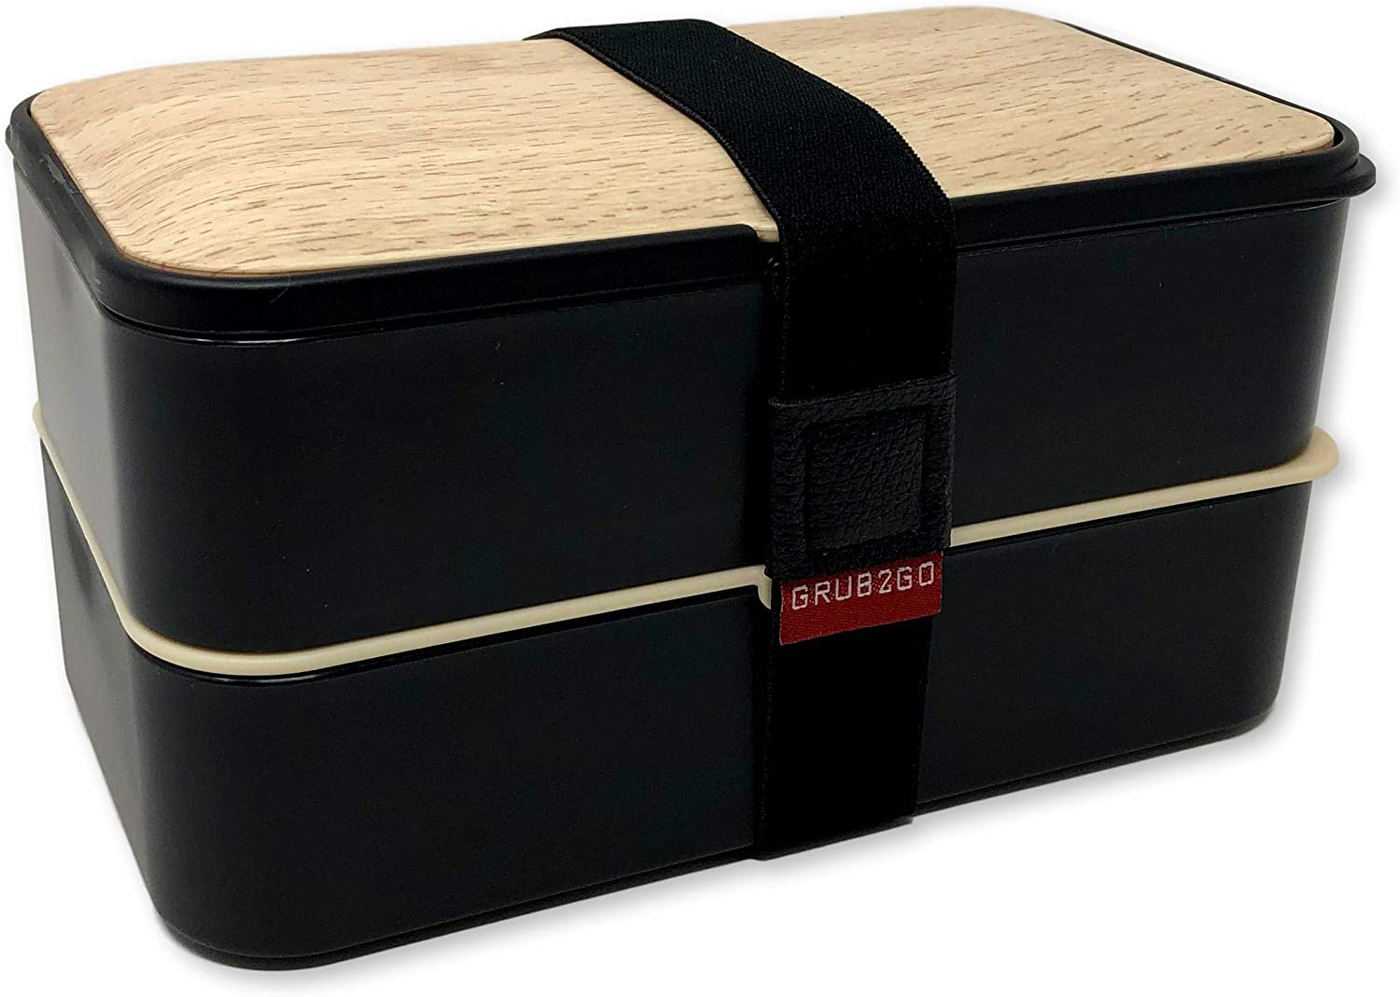 THE ORIGINAL Japanese Bento Box (Upgraded 2020 Black & Bamboo Design) w/ 2 Dividers + Larger Utensils w/Holder - Leakproof Lunch Container